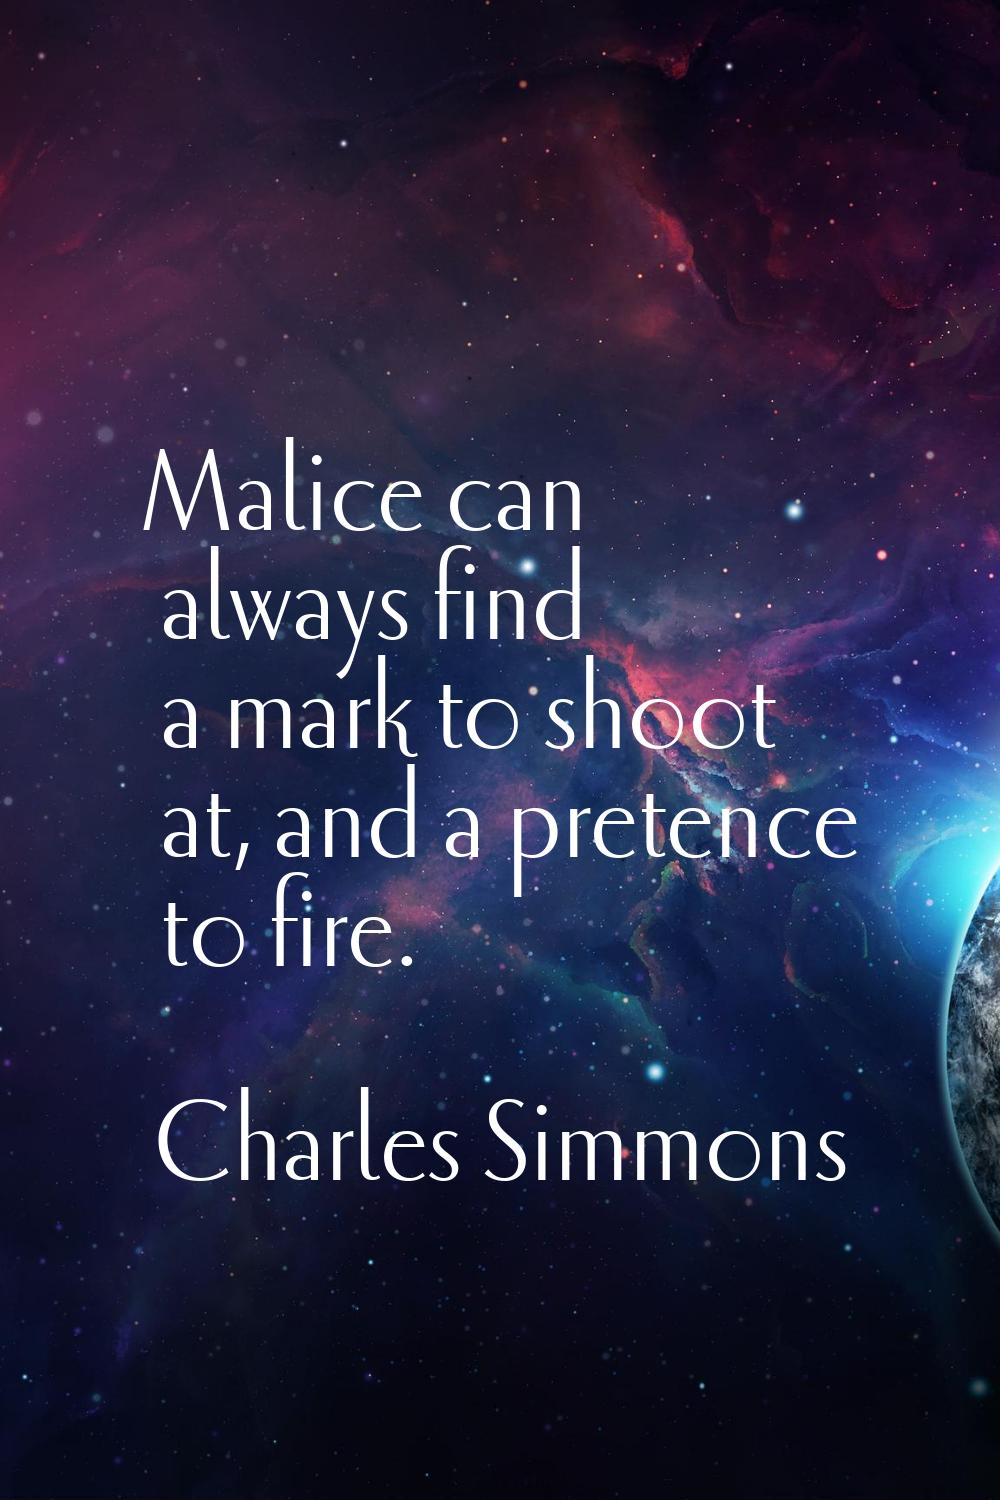 Malice can always find a mark to shoot at, and a pretence to fire.